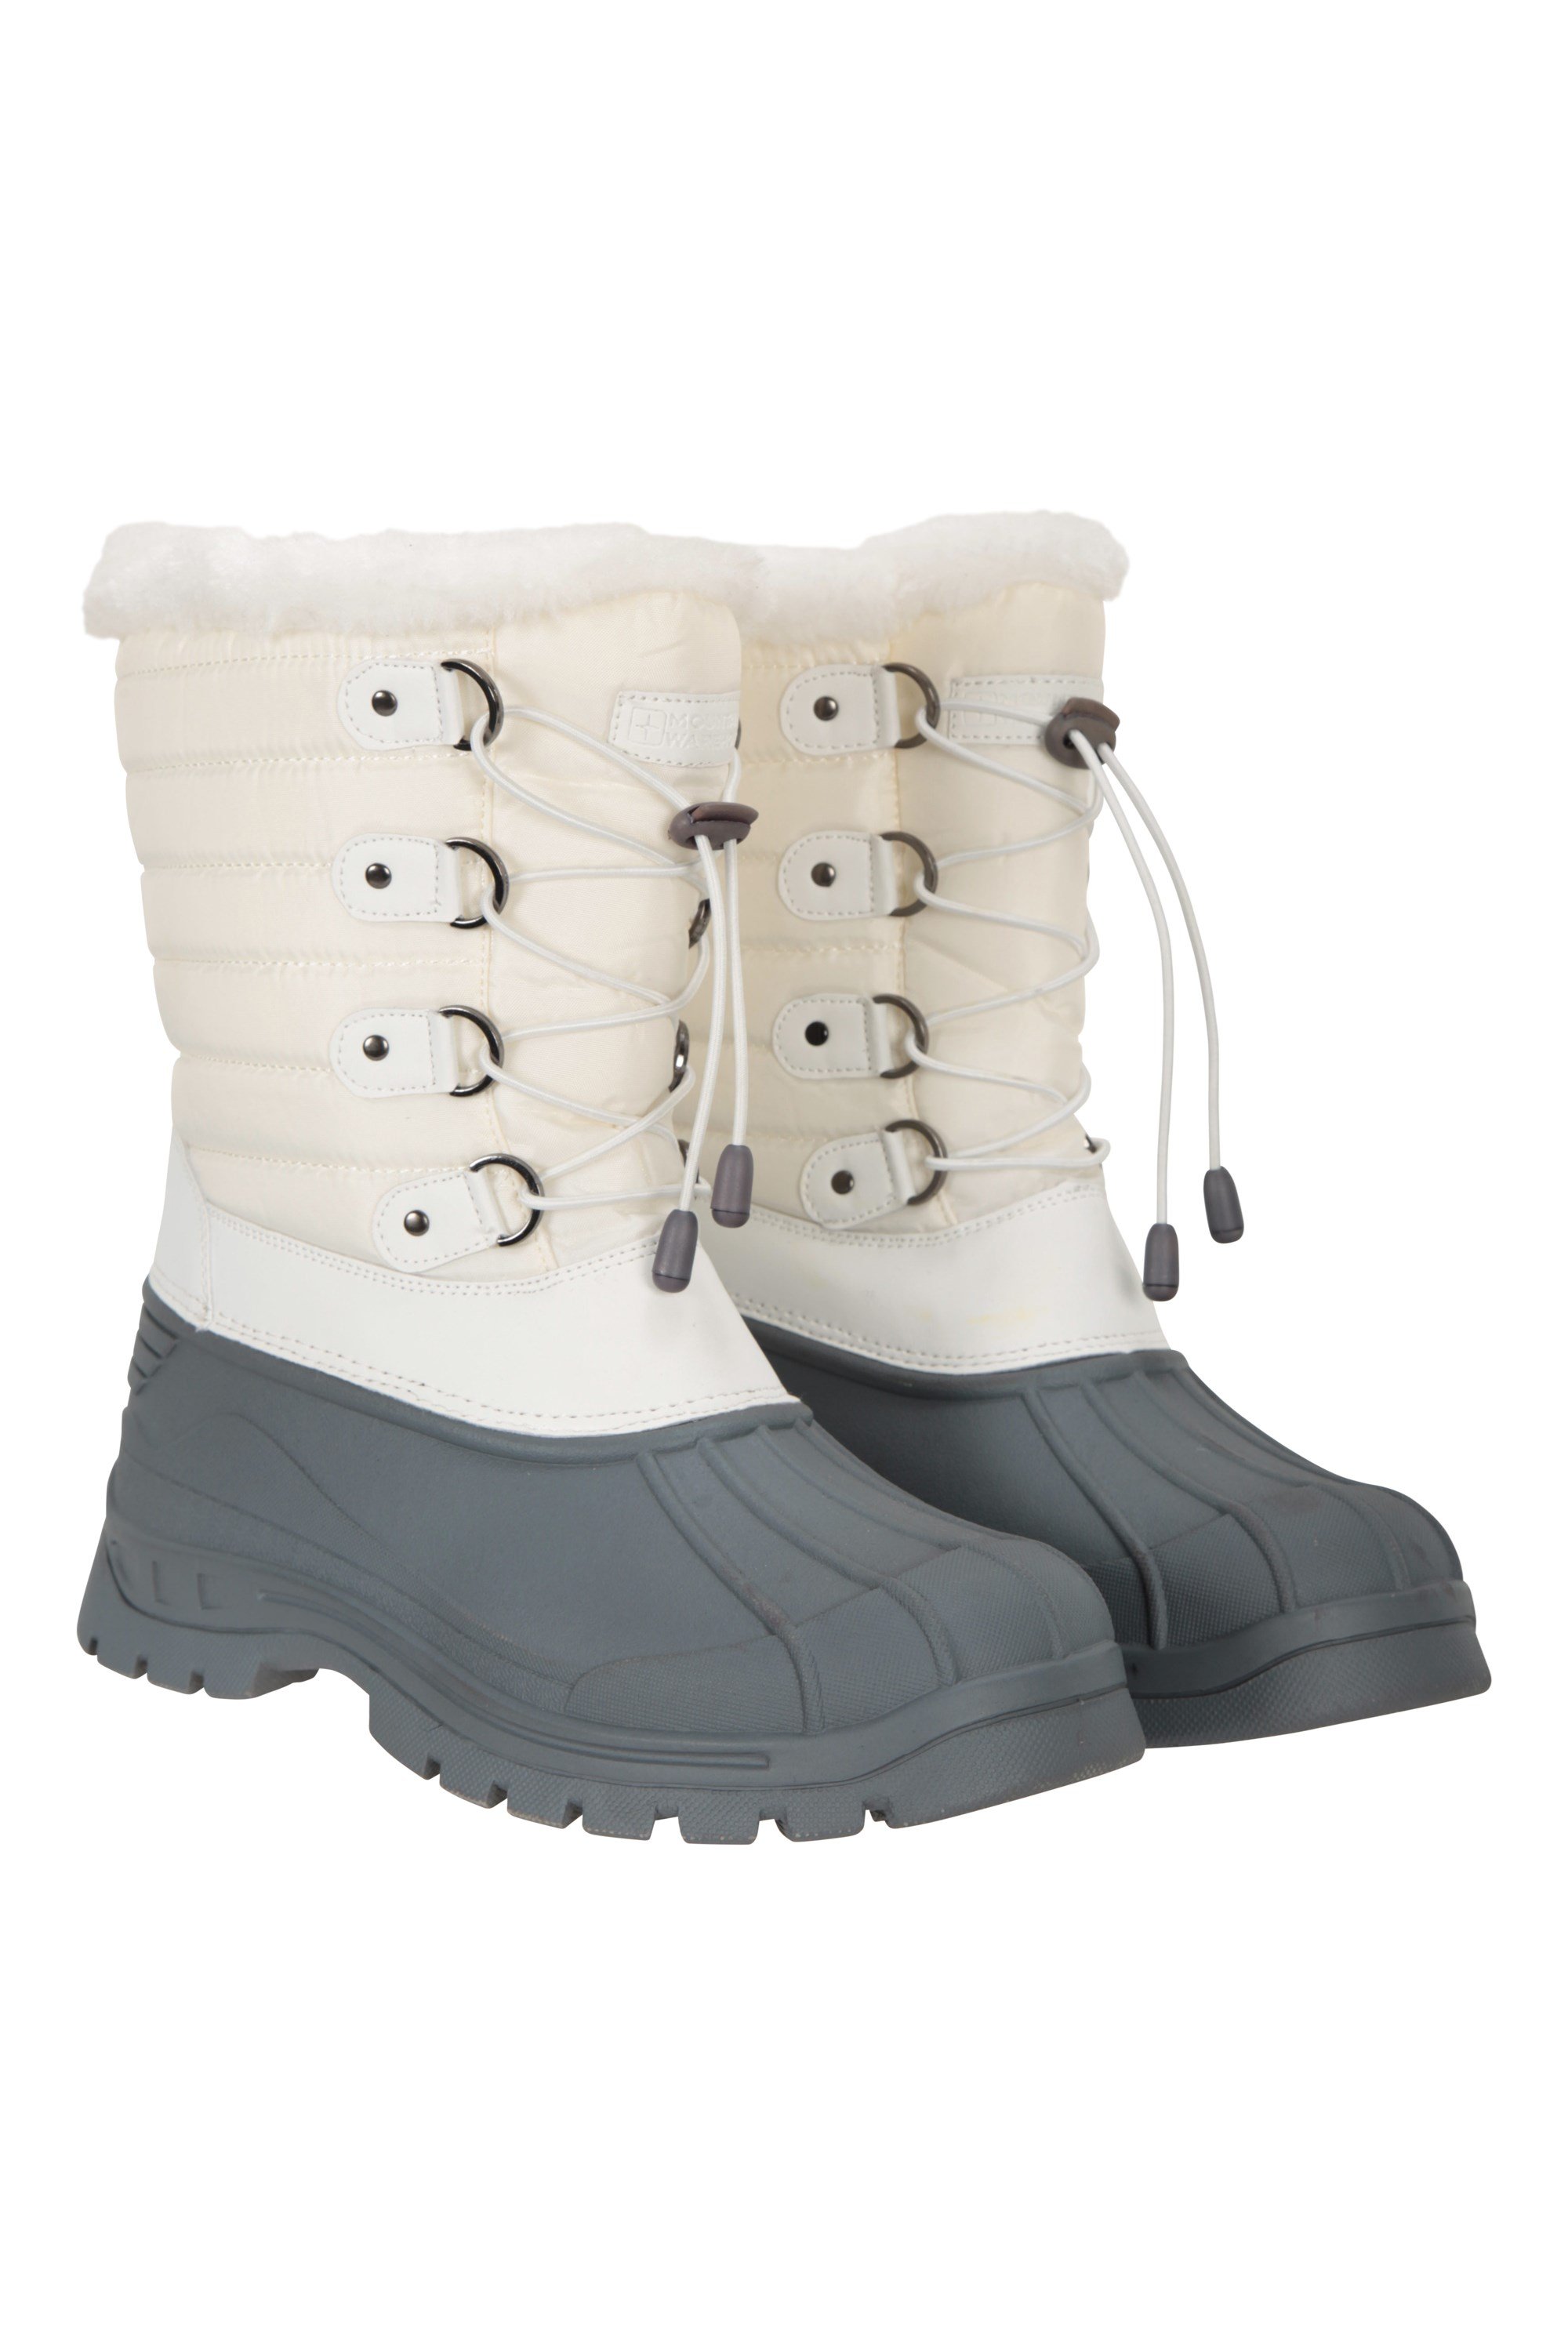 Whistler Womens Adaptive Snow Boots | Warehouse US